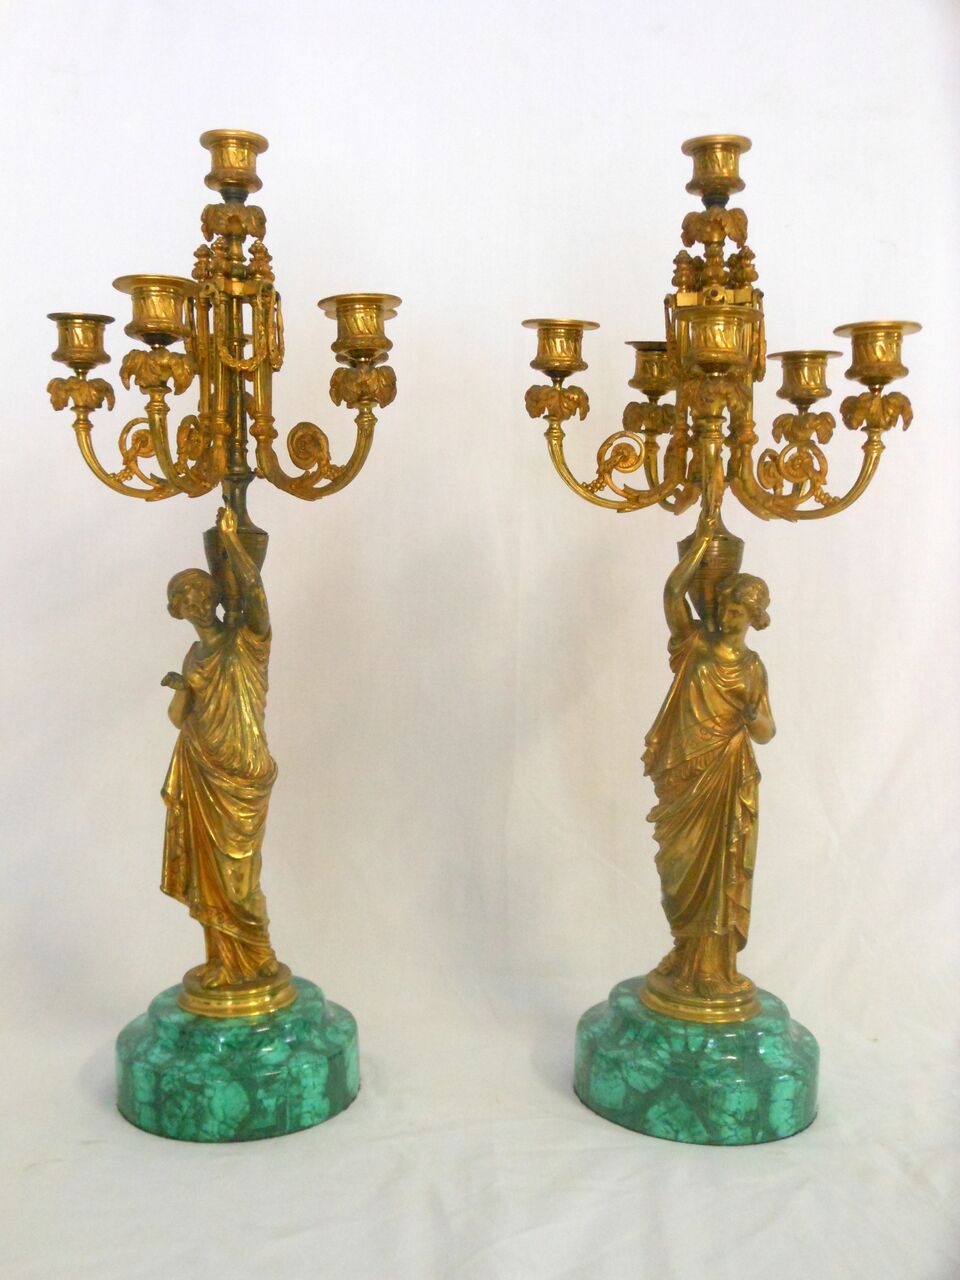 Candelabra With Woman Stand Decal